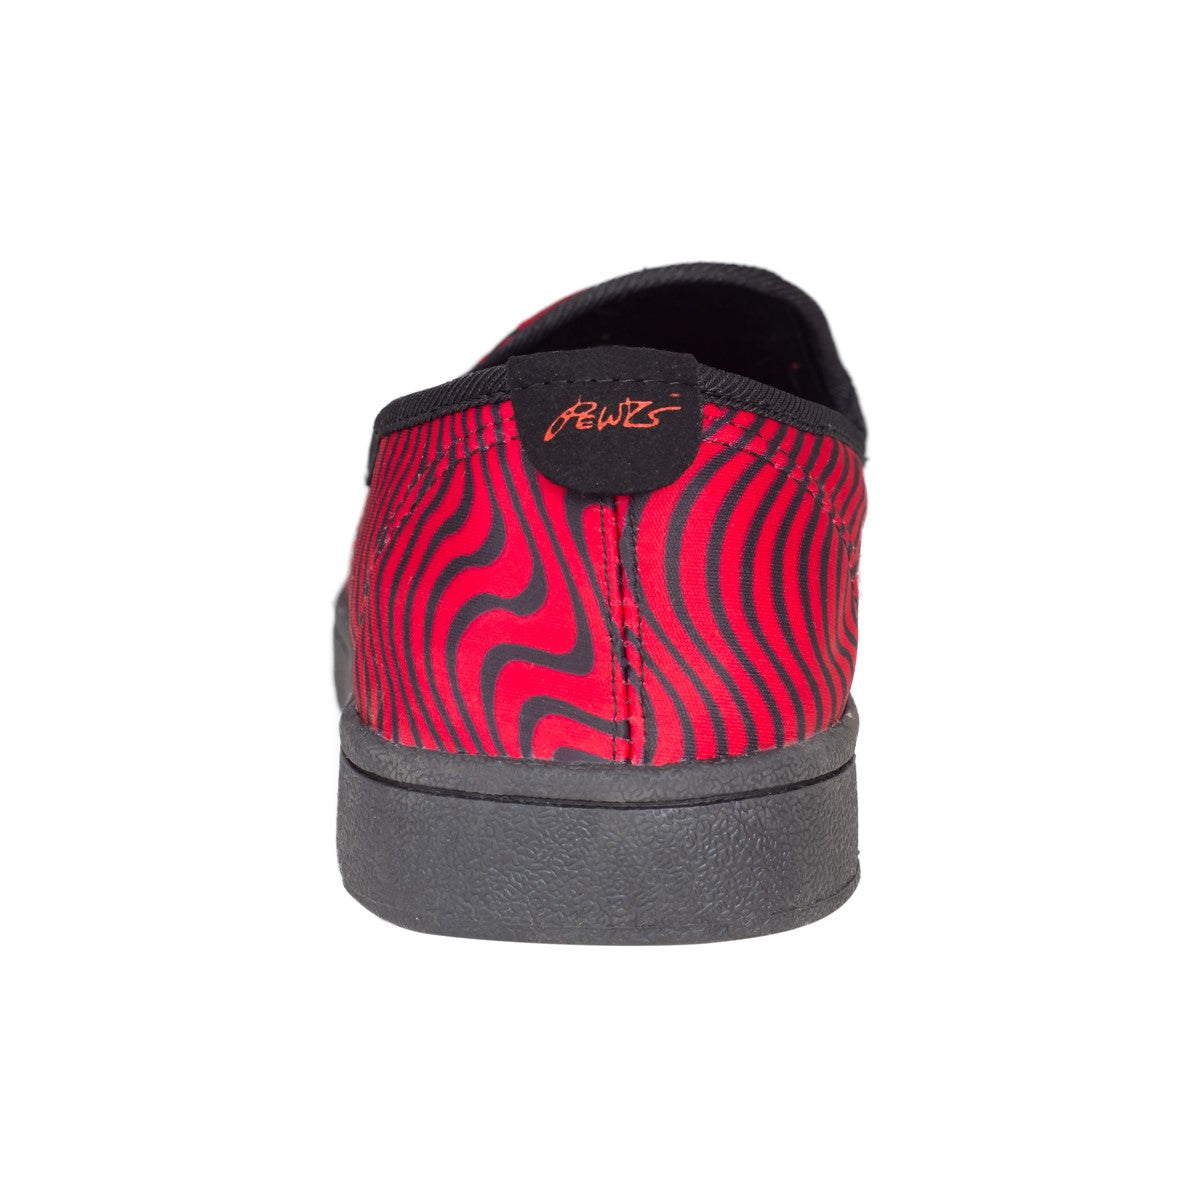 PewDiePie Slip On Shoes - Ugly Christmas Sweaters